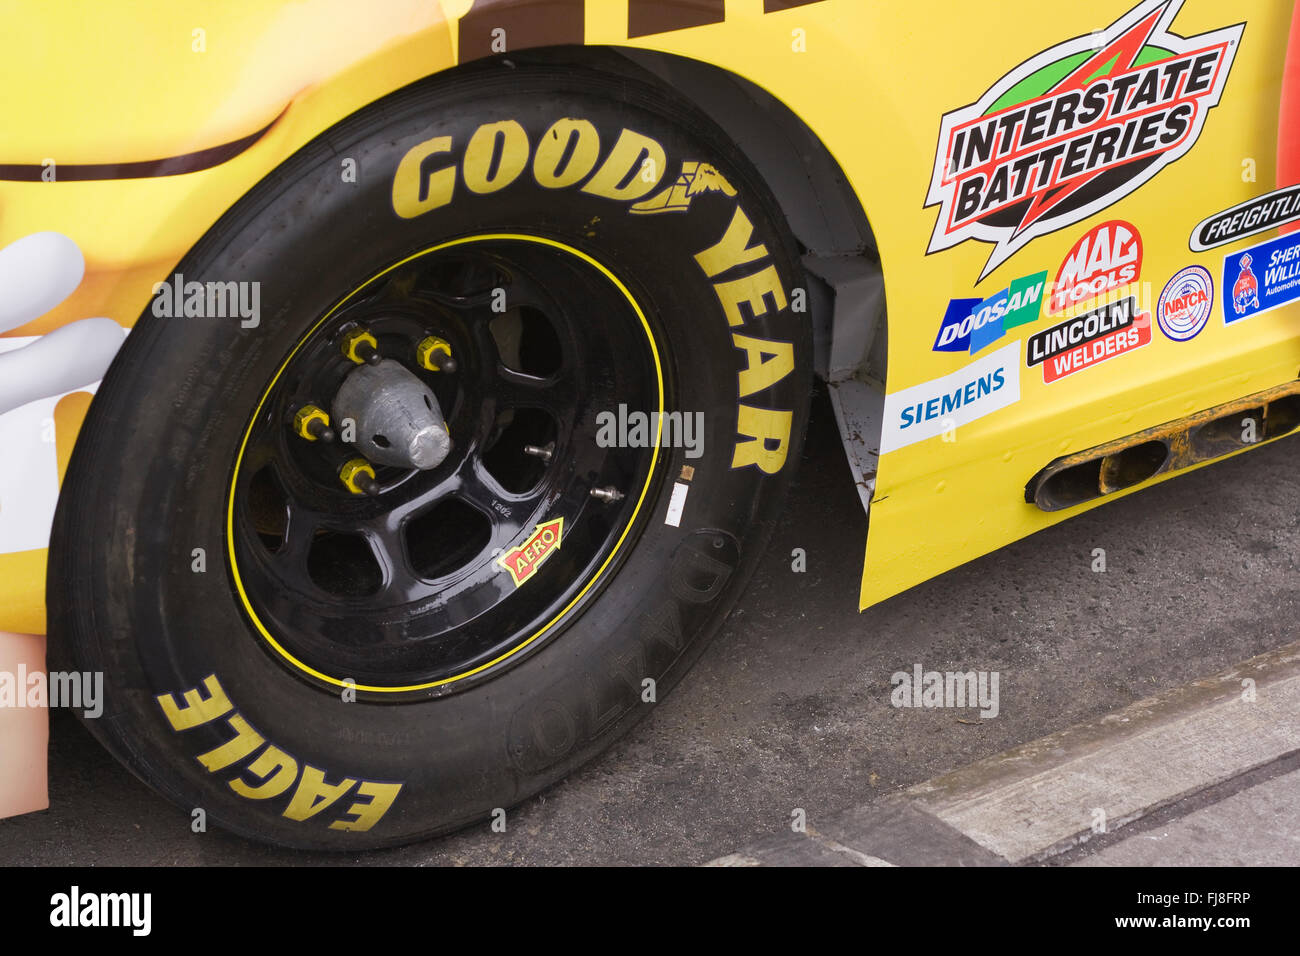 Right Rear Goodyear Eagle D4470 racing tire of a NASCAR Racecar parked on the street Stock Photo